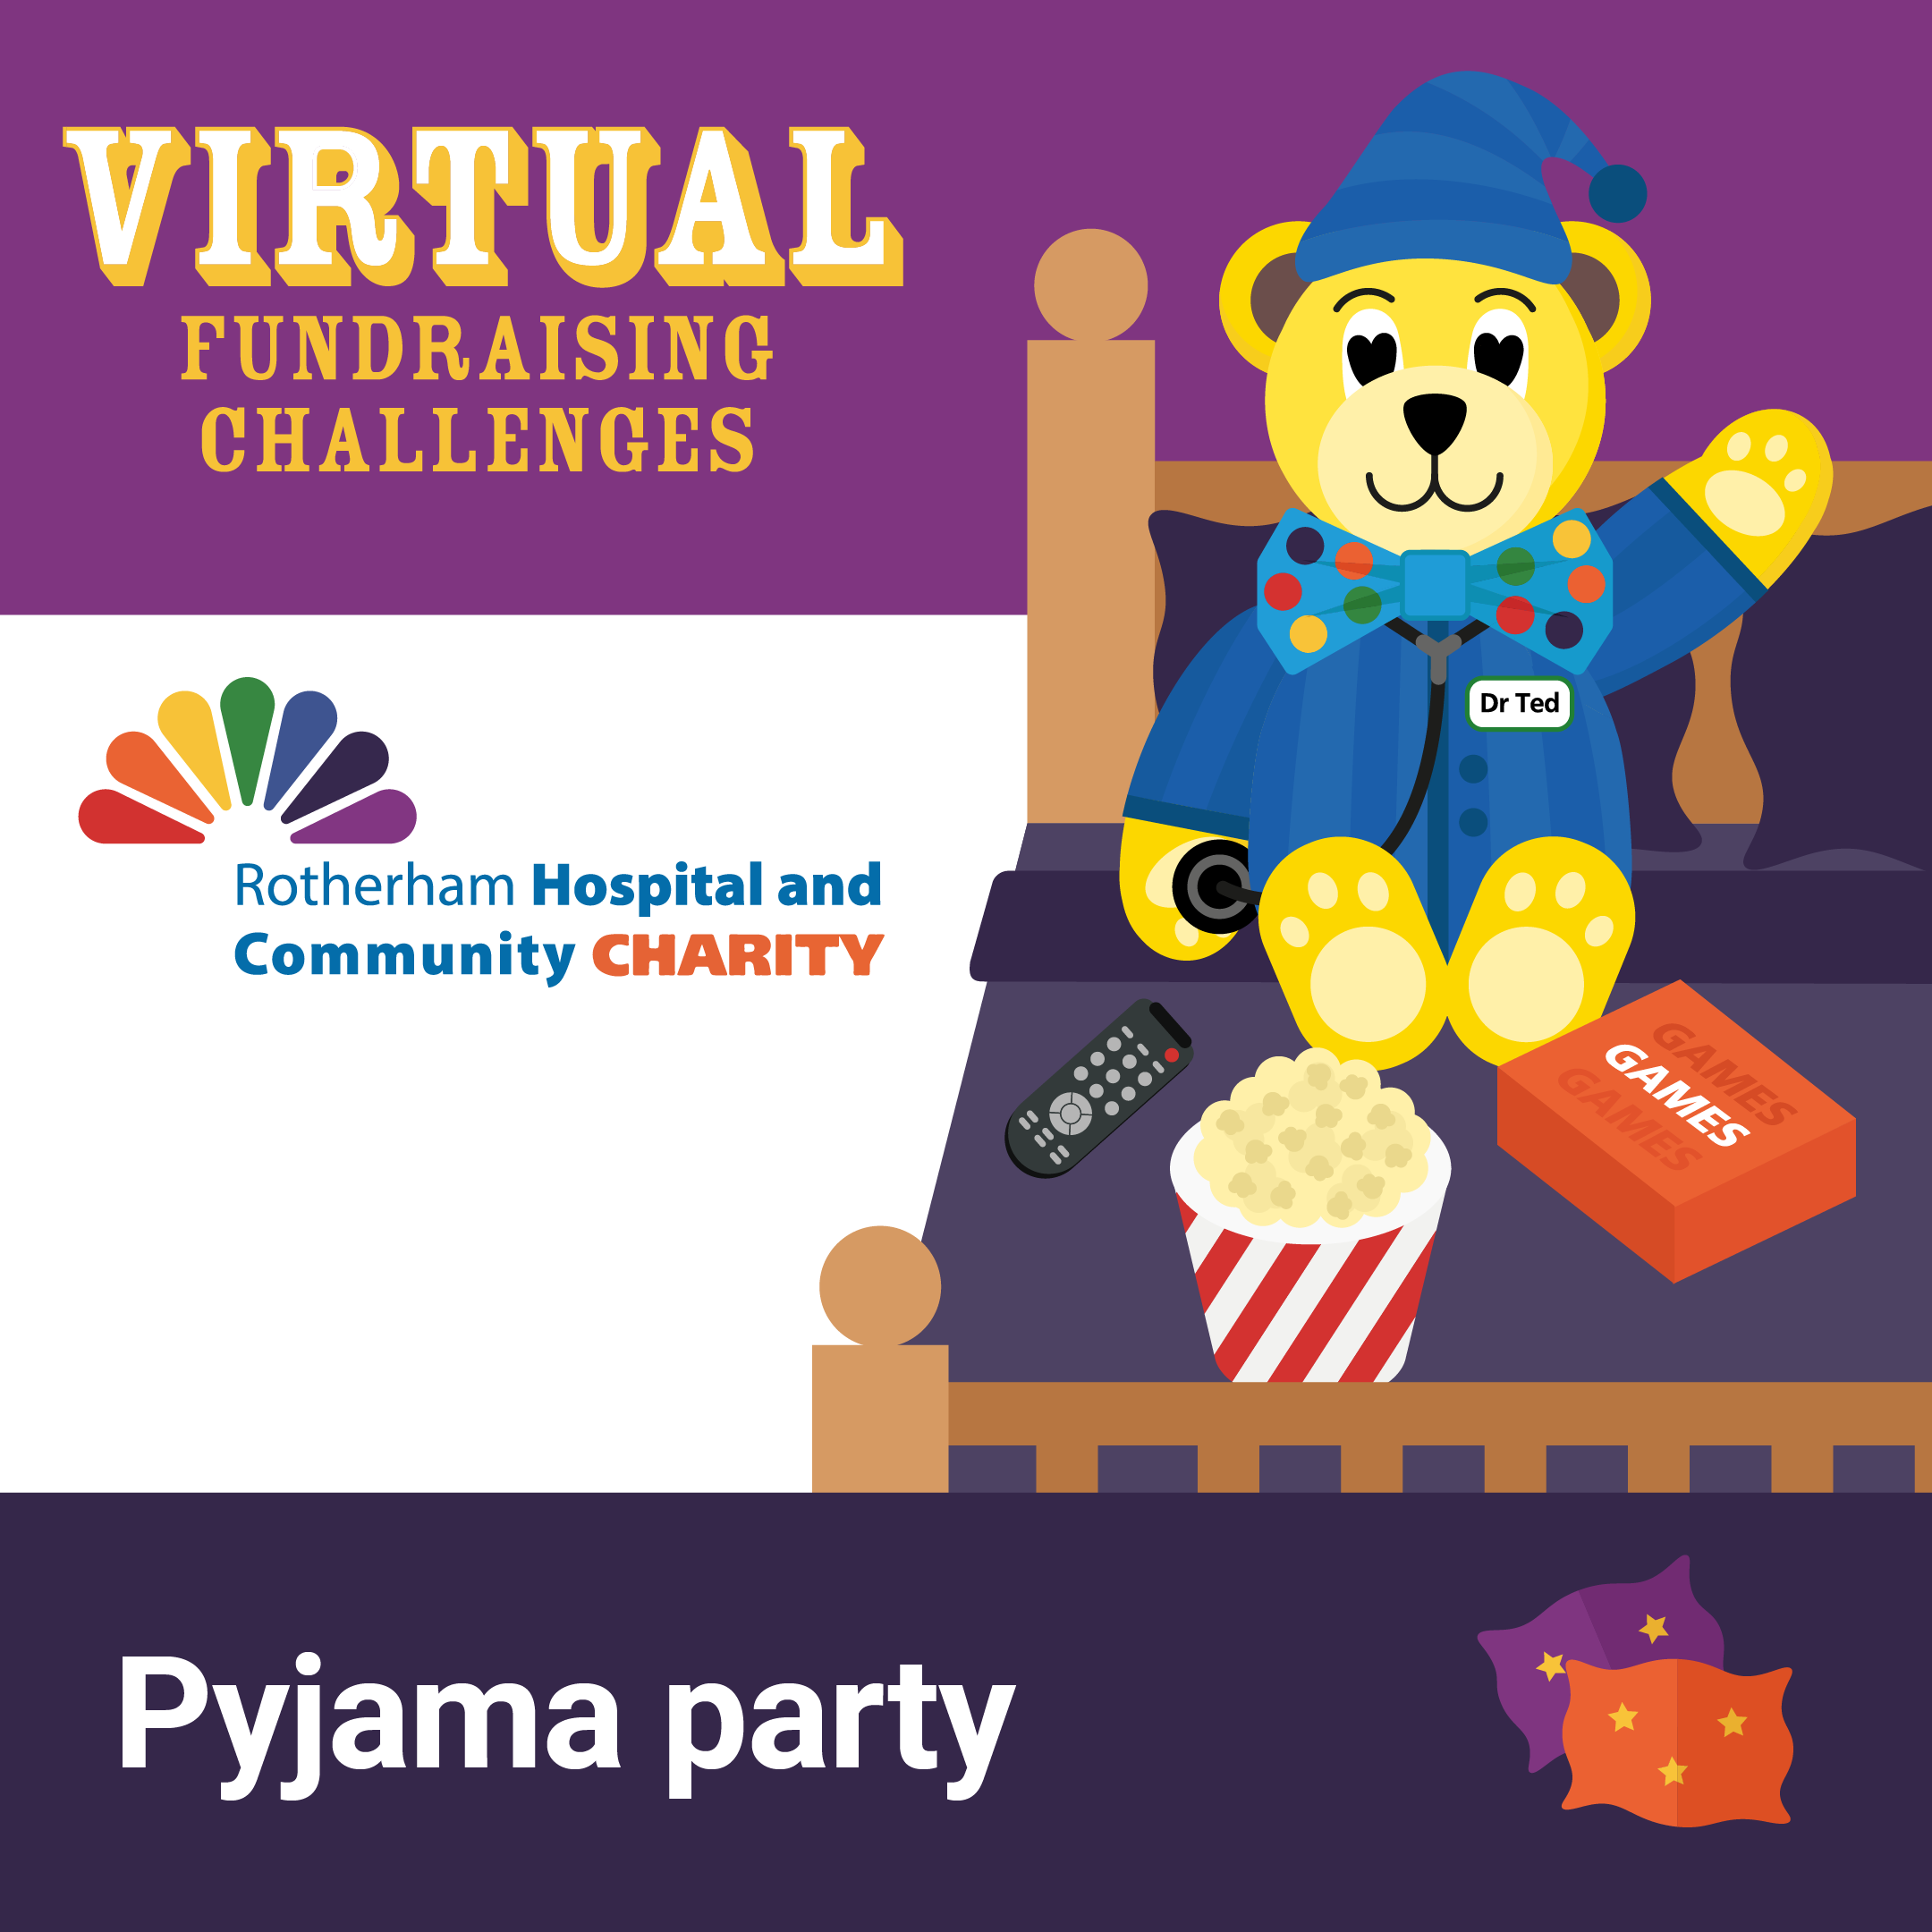 Turn your pyjamas into pounds for NHS charity